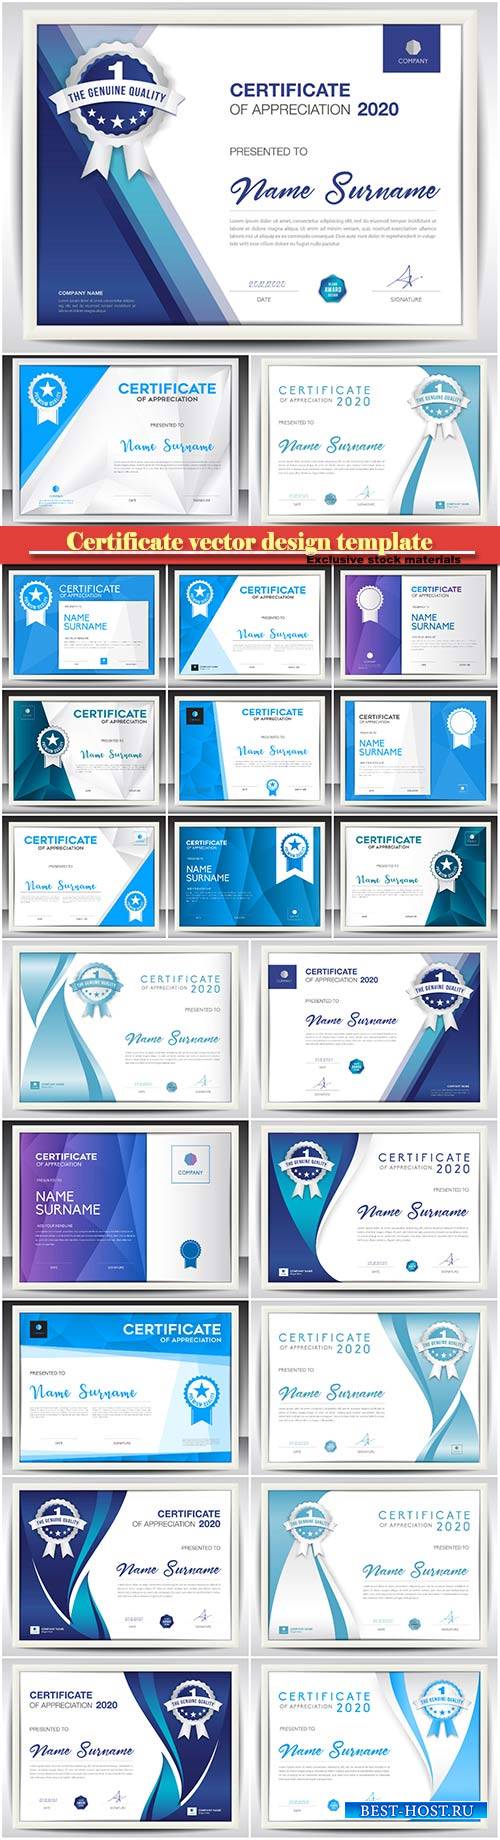 Certificate and vector diploma design template # 37